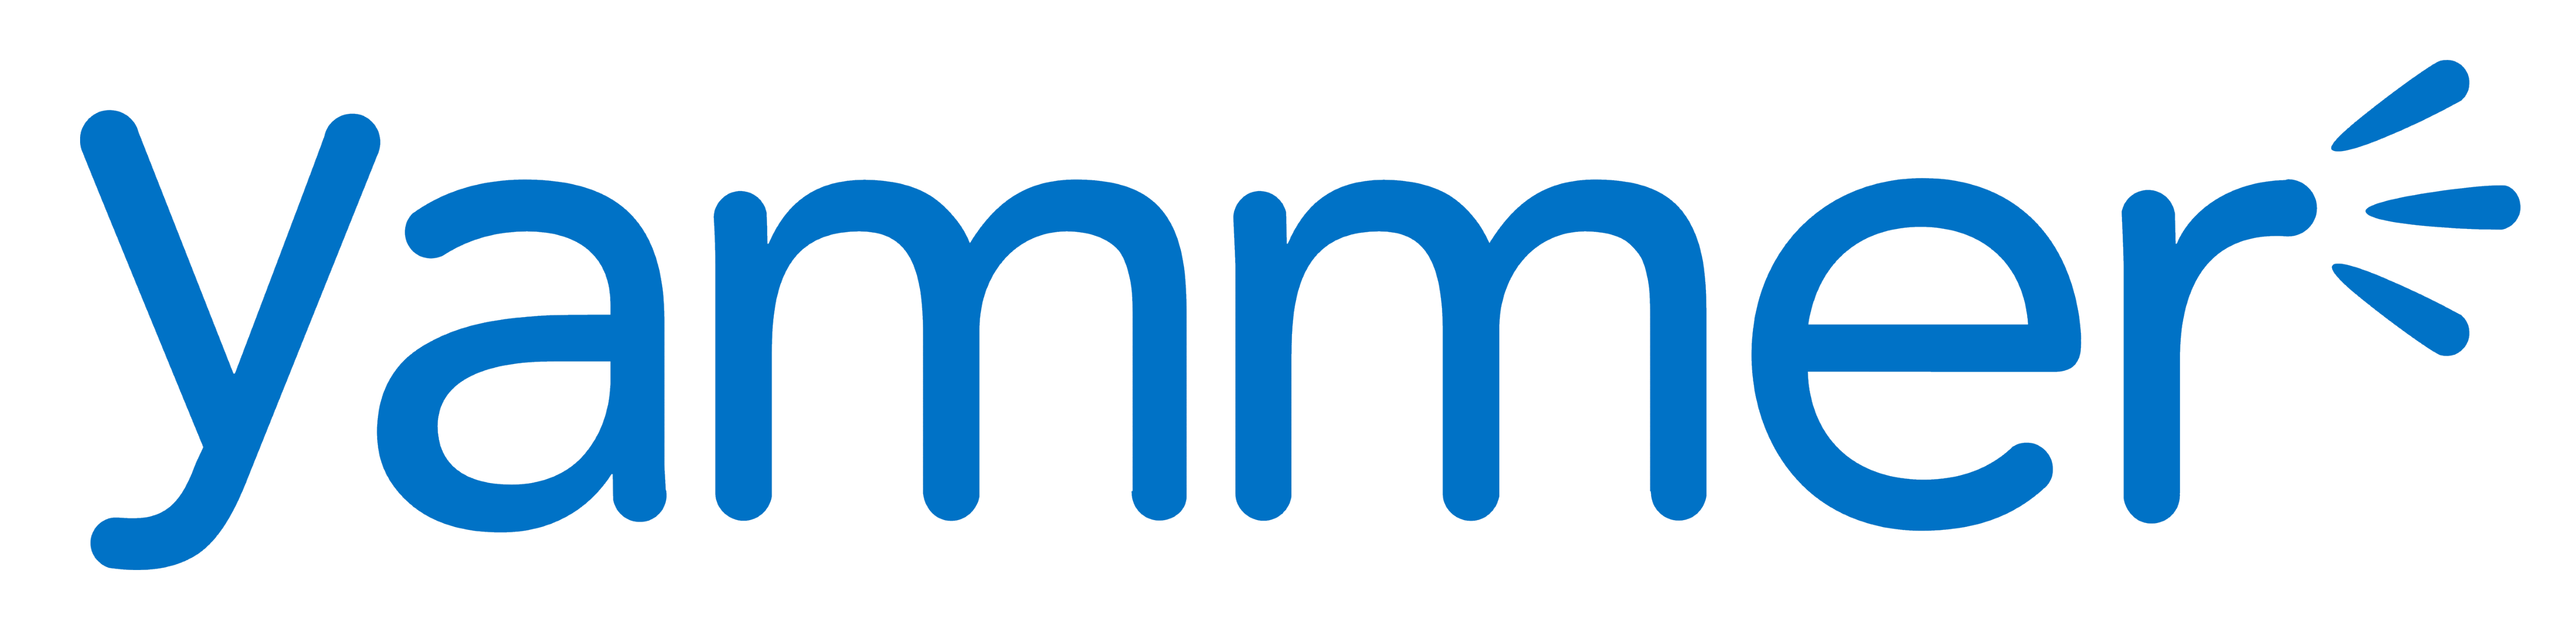 Yammer Logo PNG - 178192